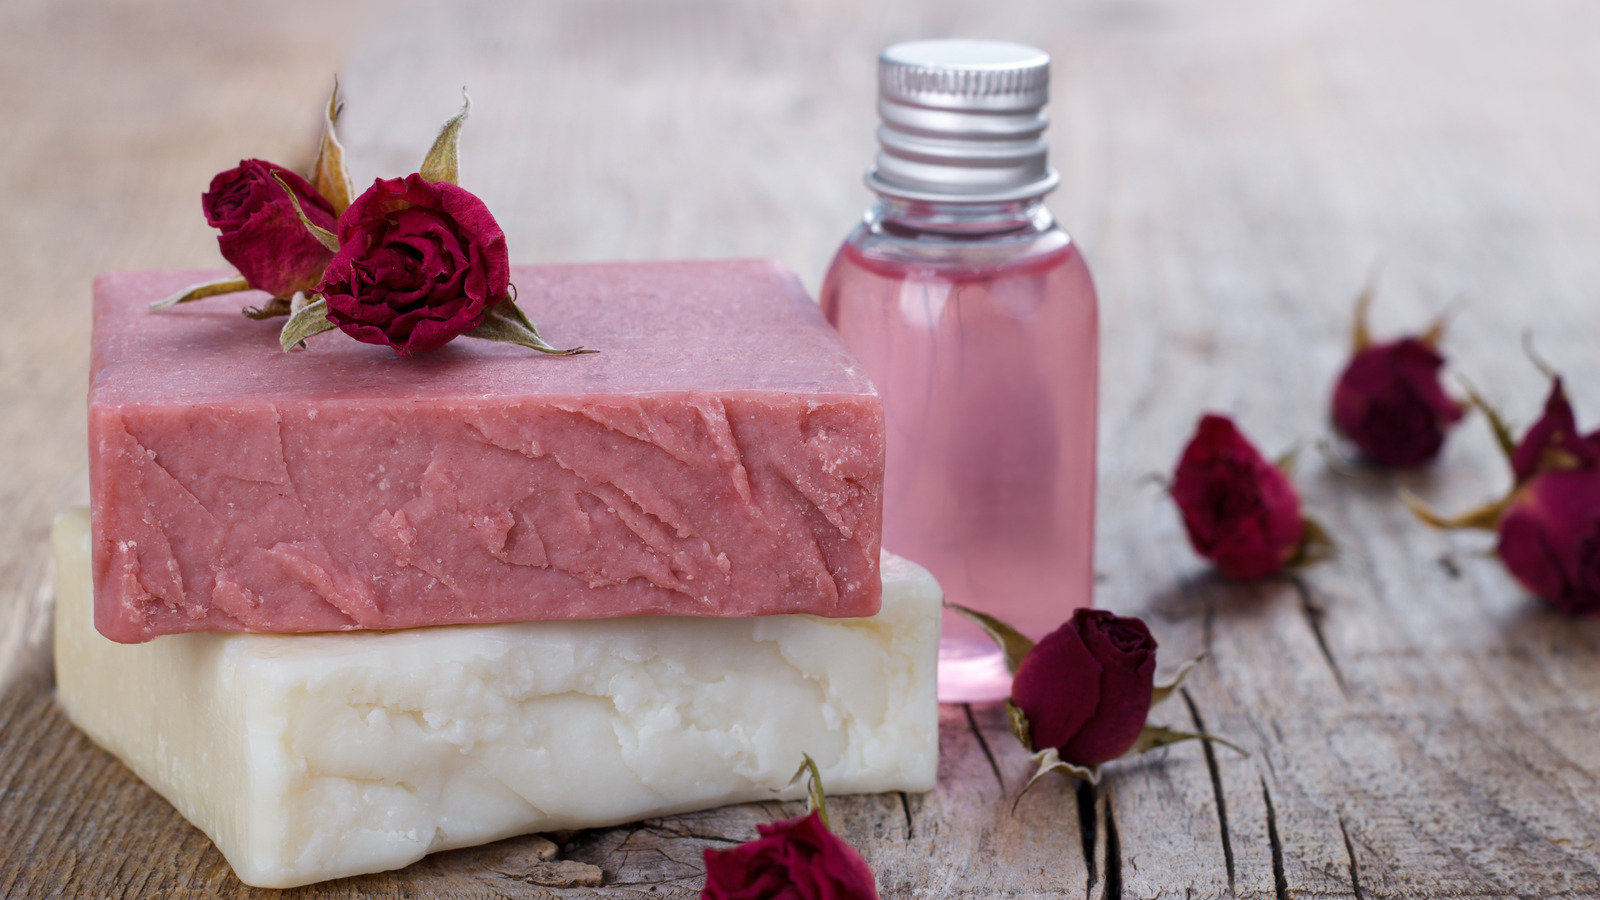 Soap Showdown: Bar soap vs. liquid for Your daily cleanse